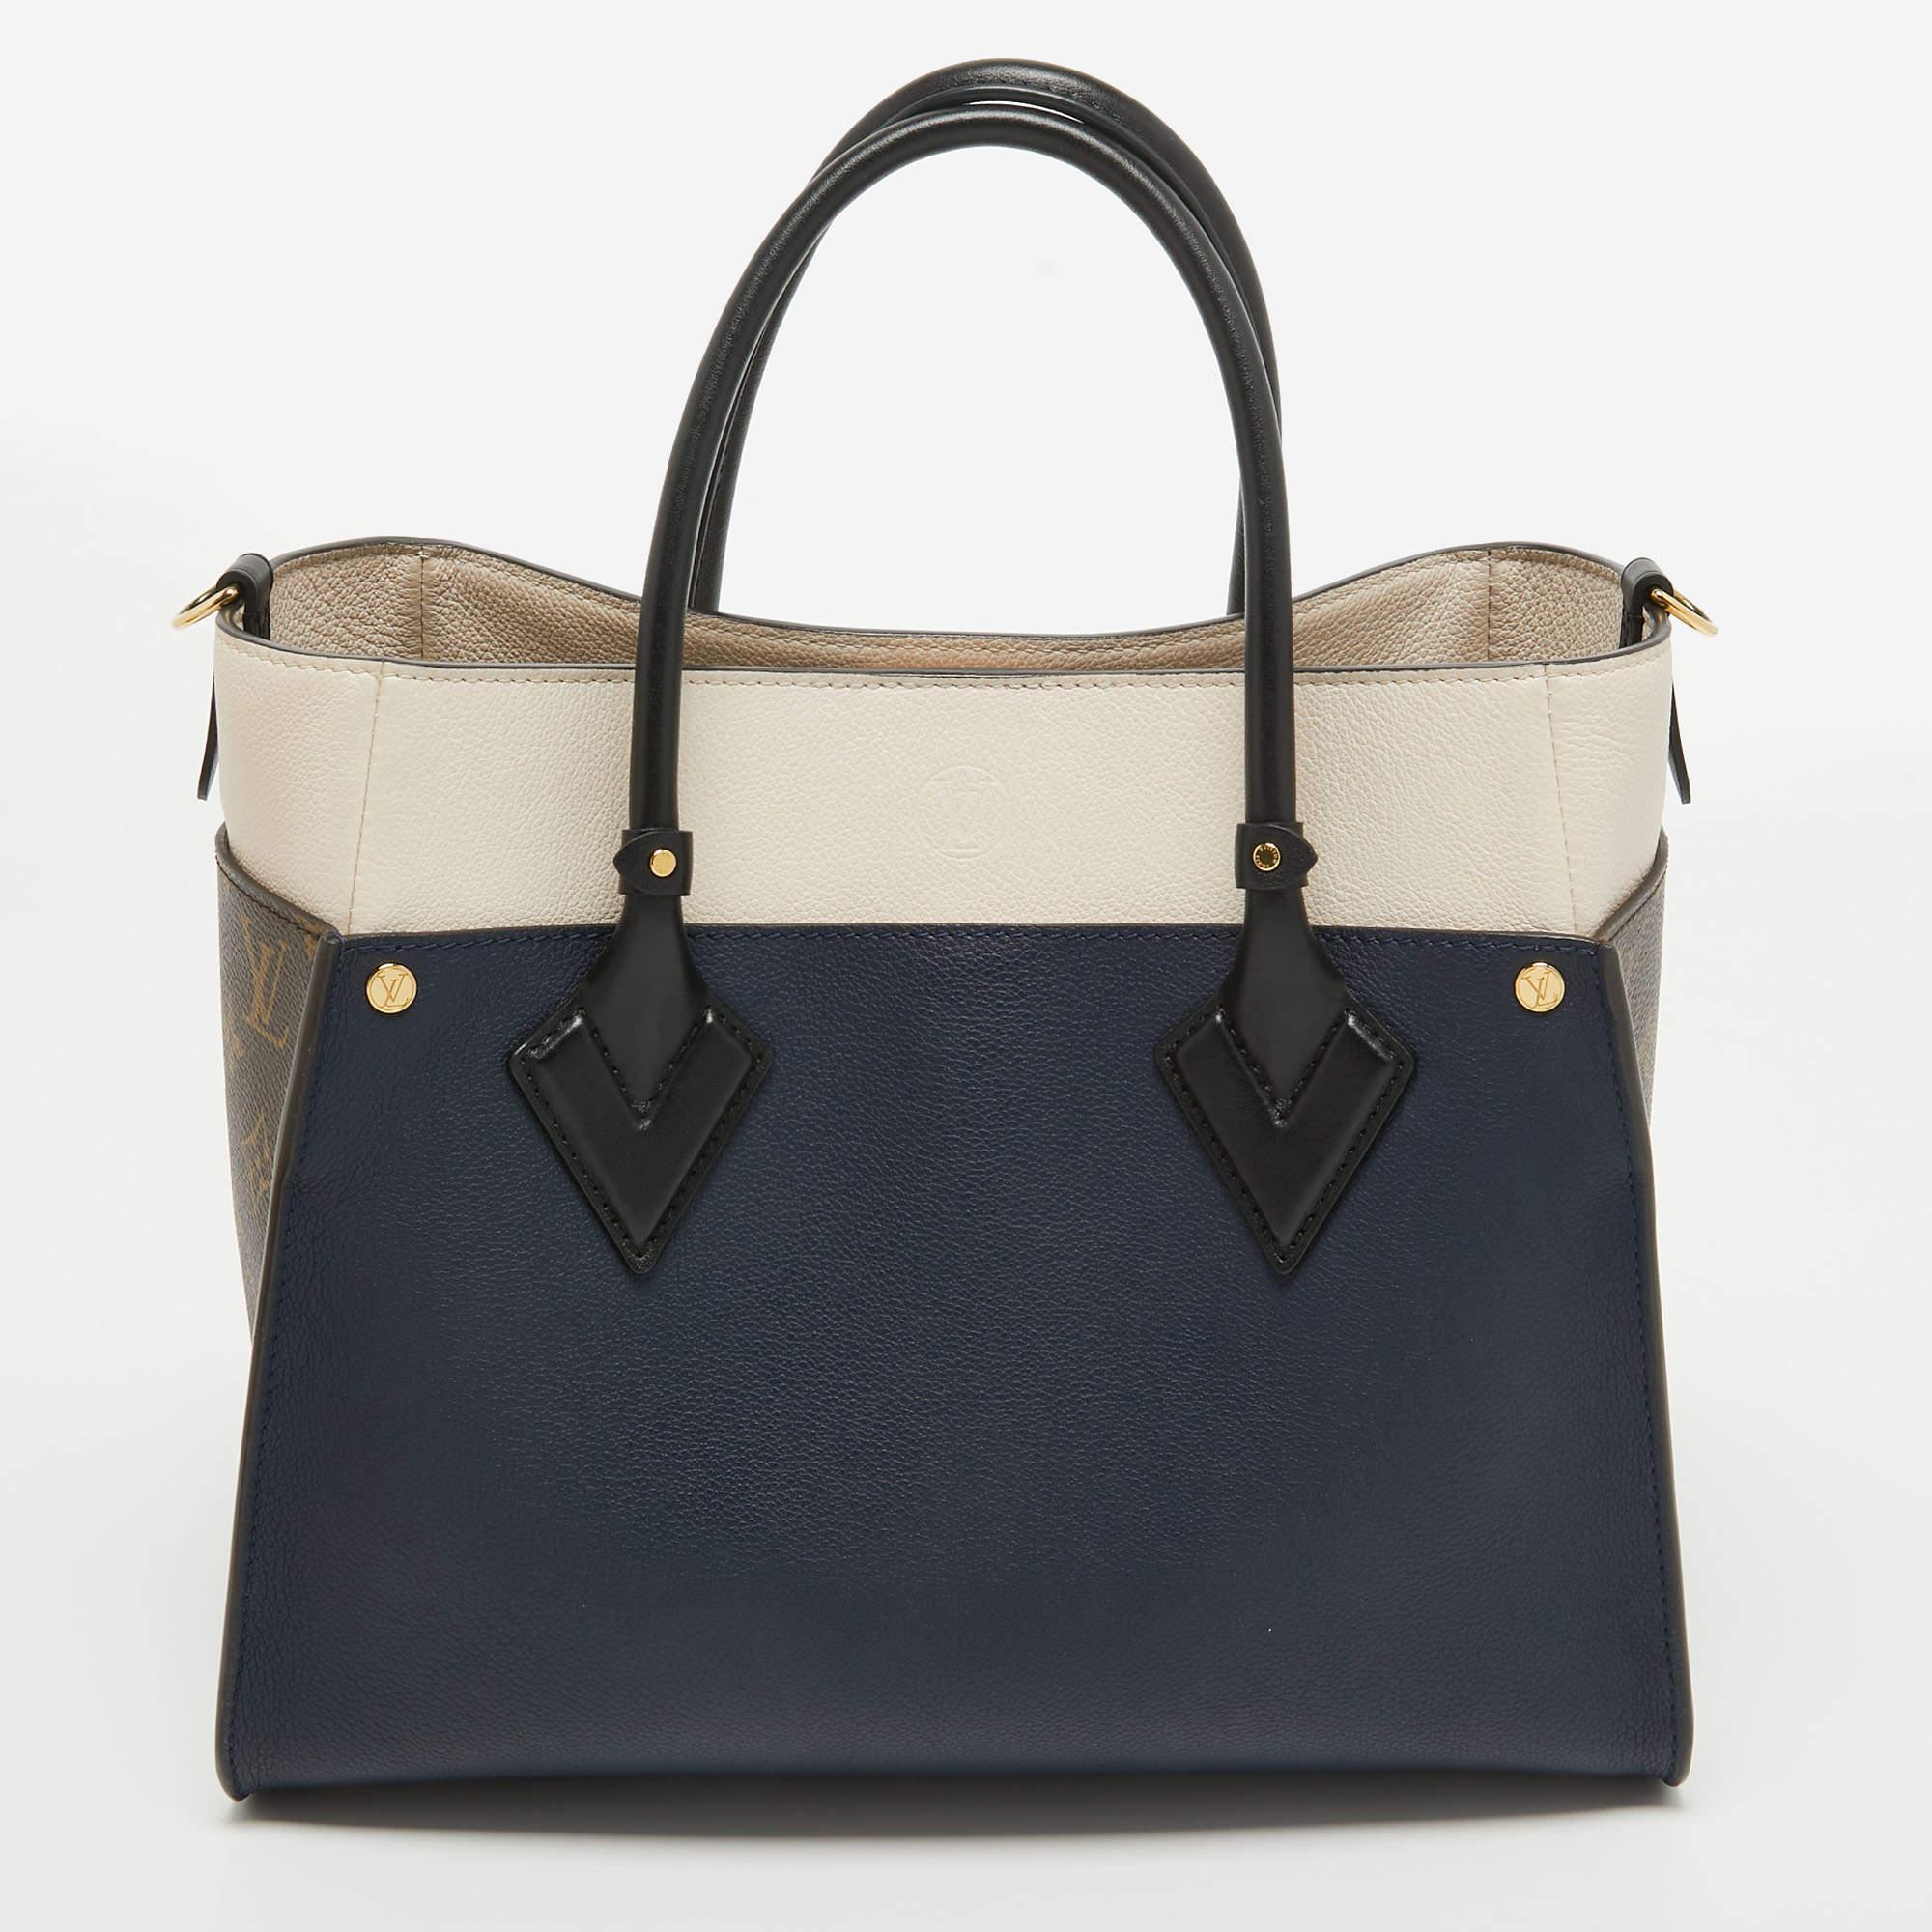 The Louis Vuitton On My Side Bag is a luxurious accessory featuring the iconic LV monogram in navy blue on durable canvas. Trimmed with supple leather, it boasts a spacious interior, adjustable shoulder strap, and gold-tone hardware, exemplifying